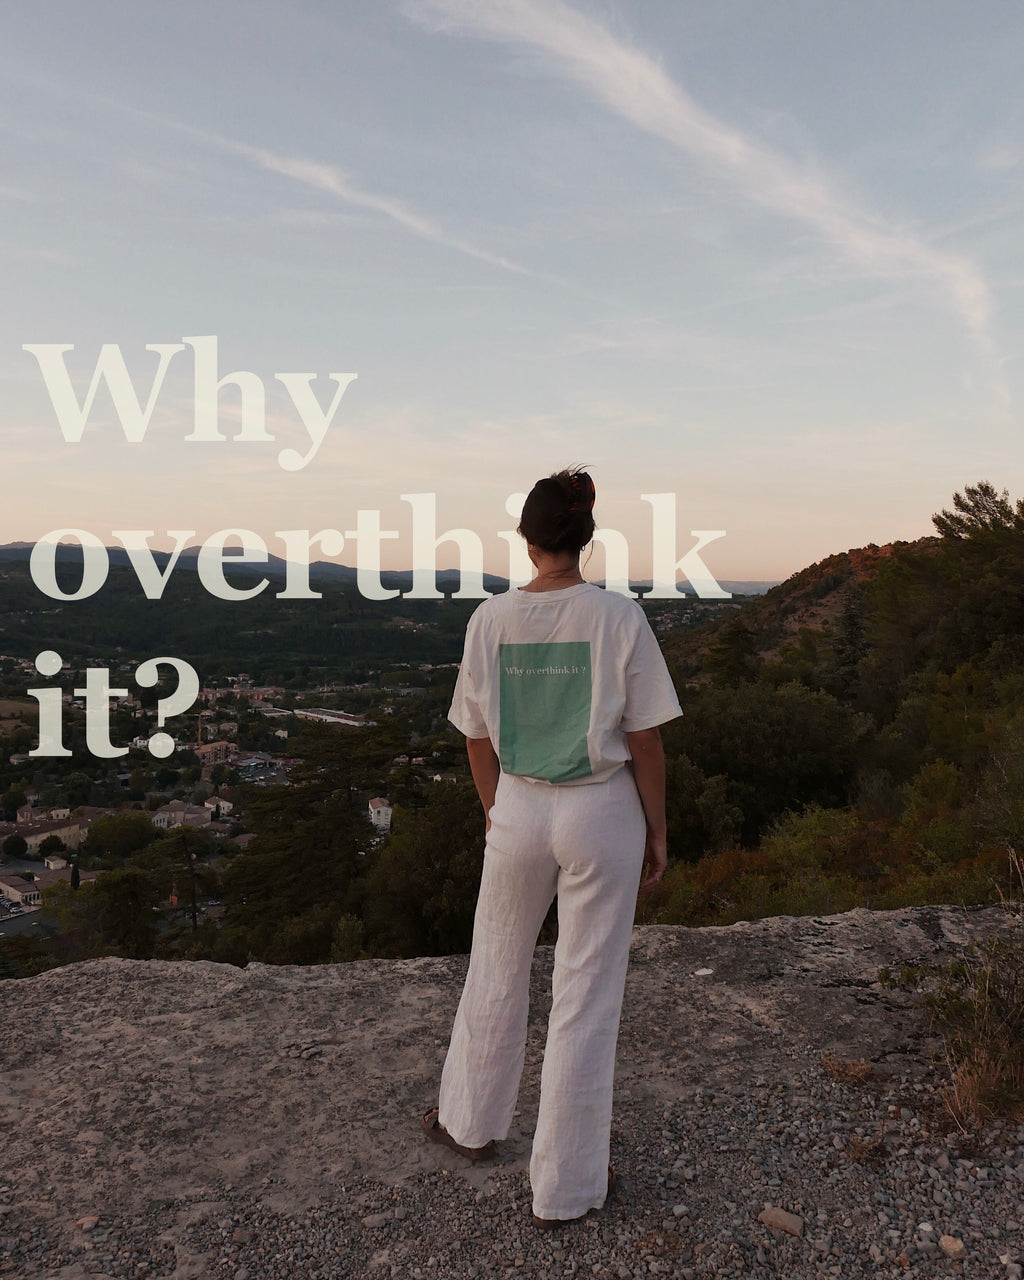 Why overthink it?